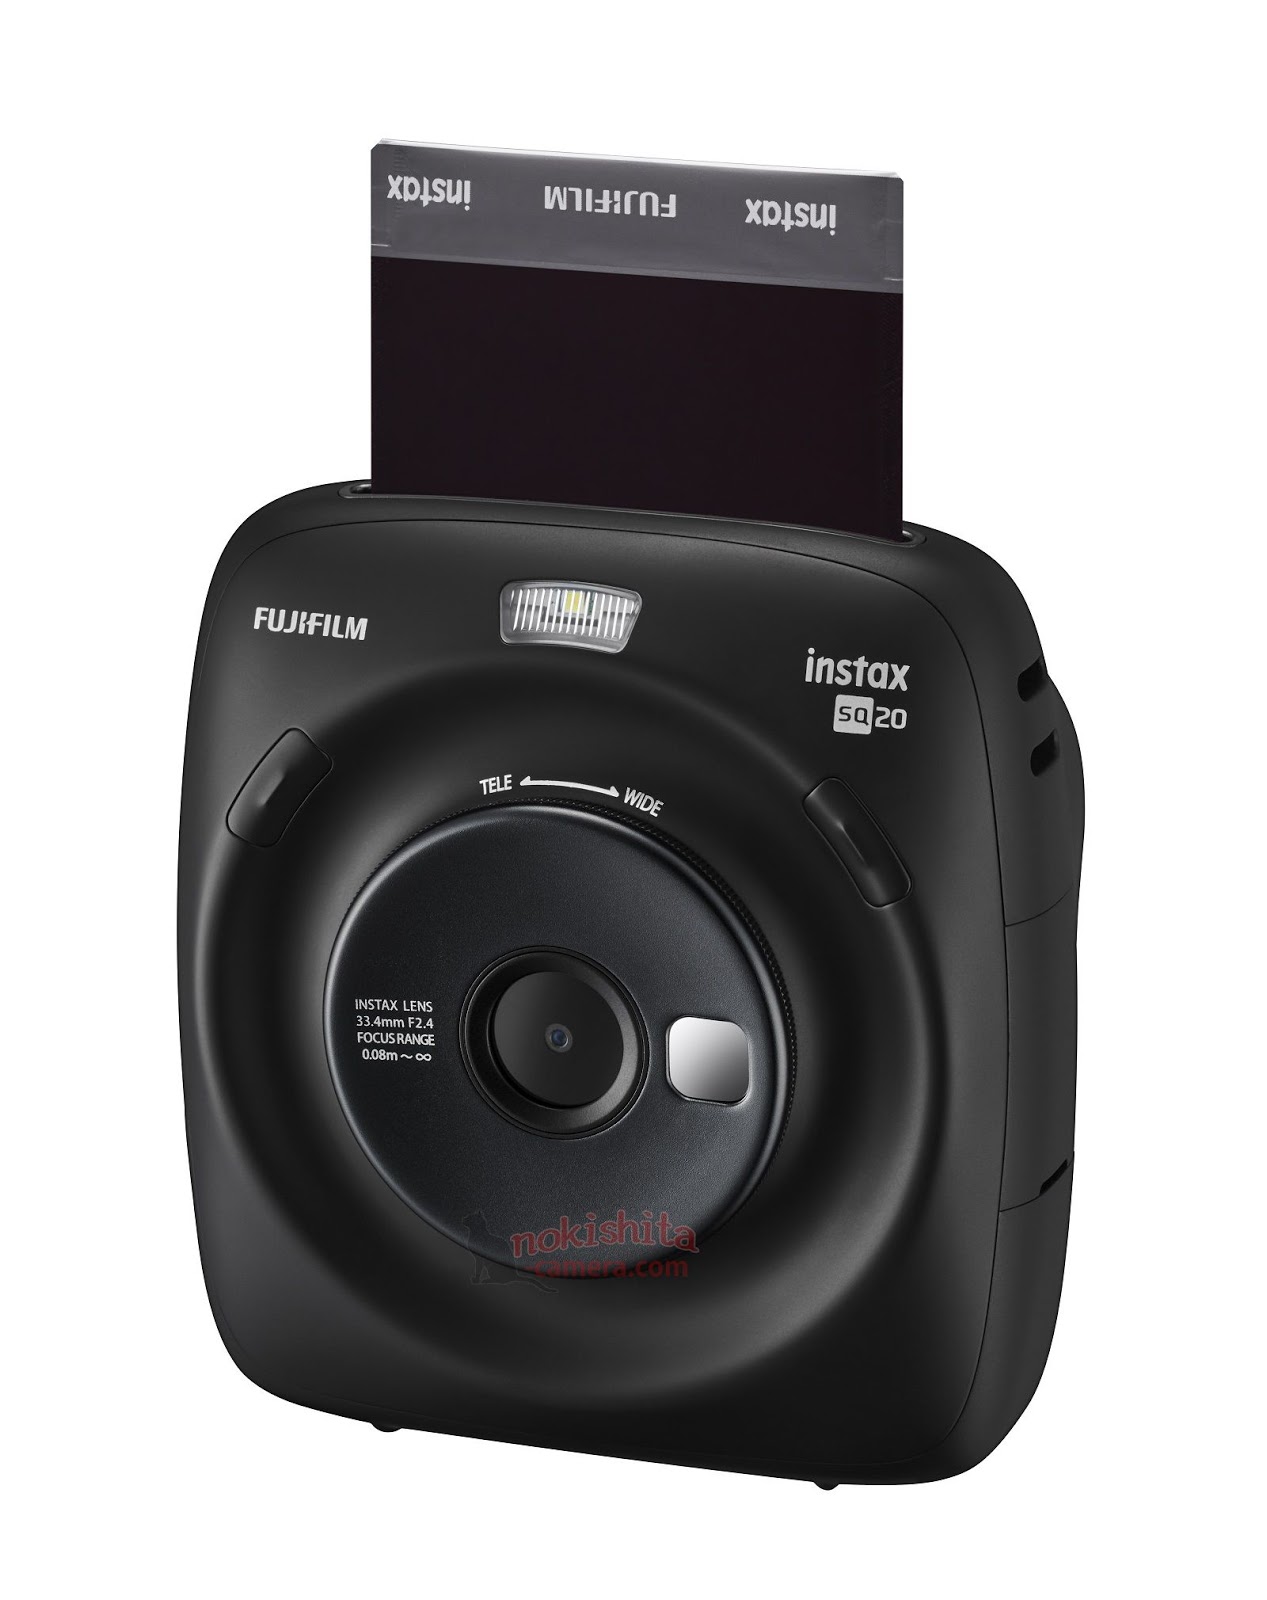 New Fuji Instax Square SQ 20 hybrid instant camera leaked online